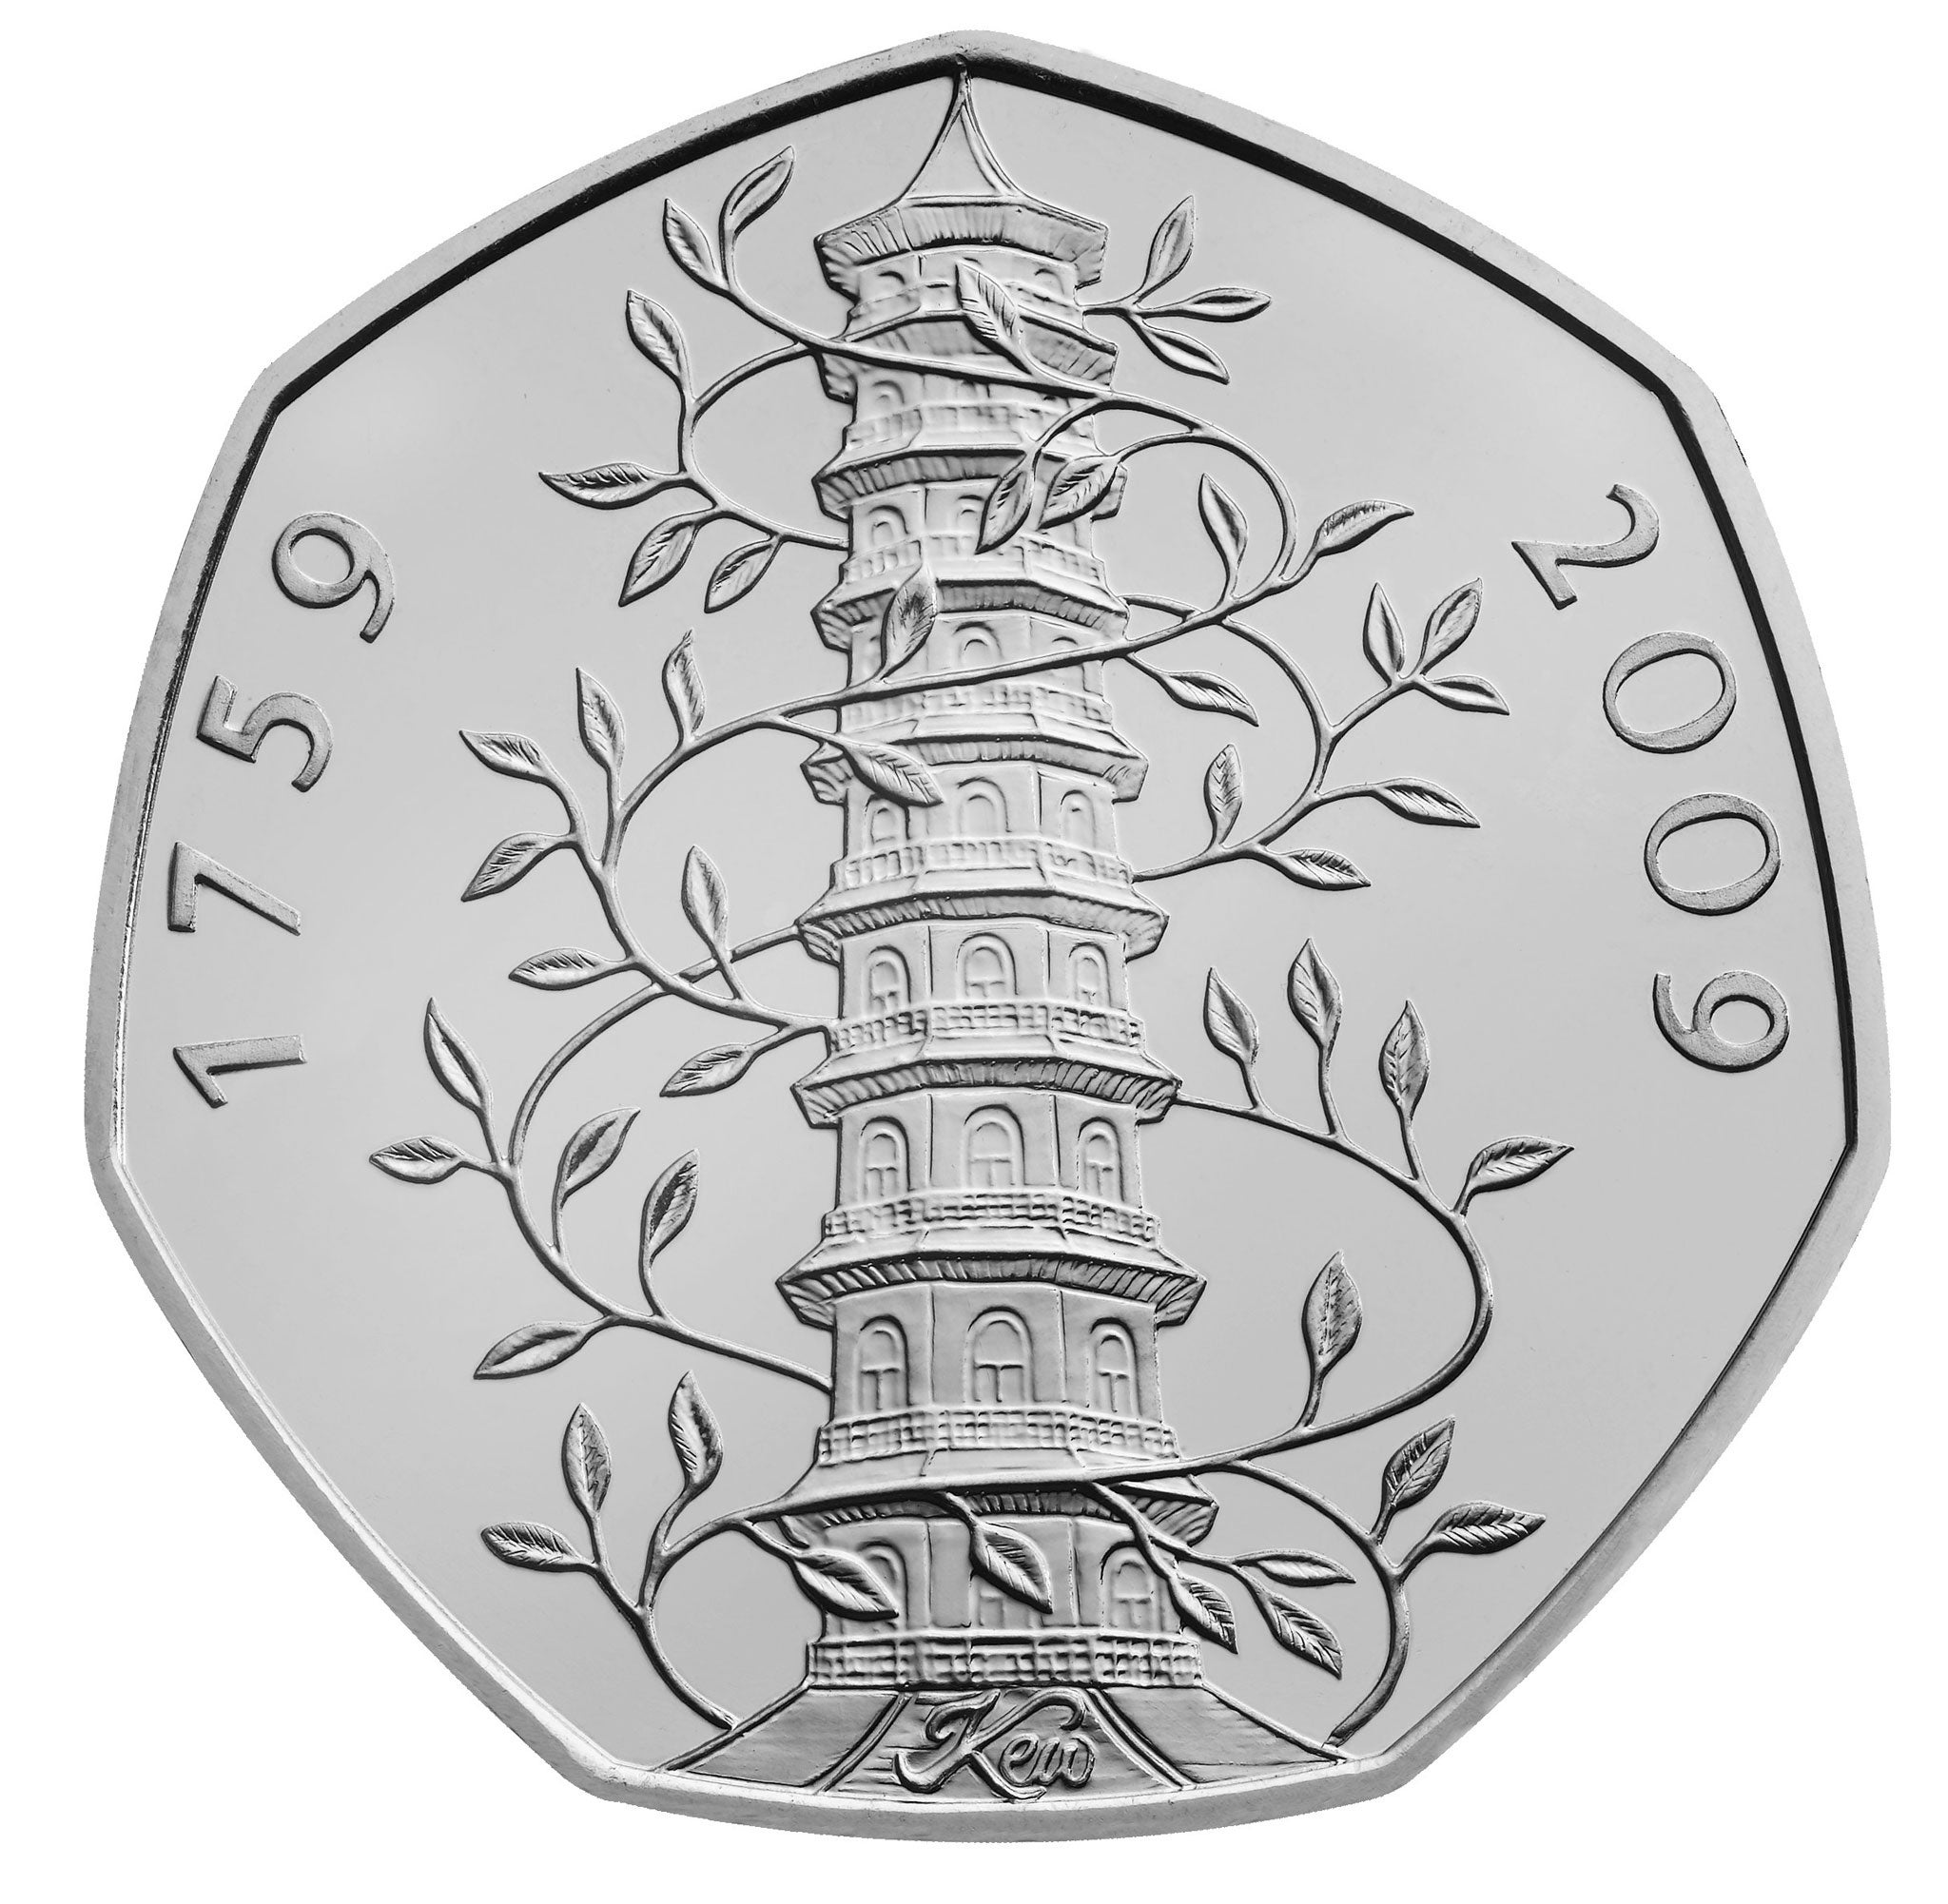 Undated photo issued by the Royal Mint shows the Kew Gardens 50p which was released in 2009 - now described as 'incredibly rare'